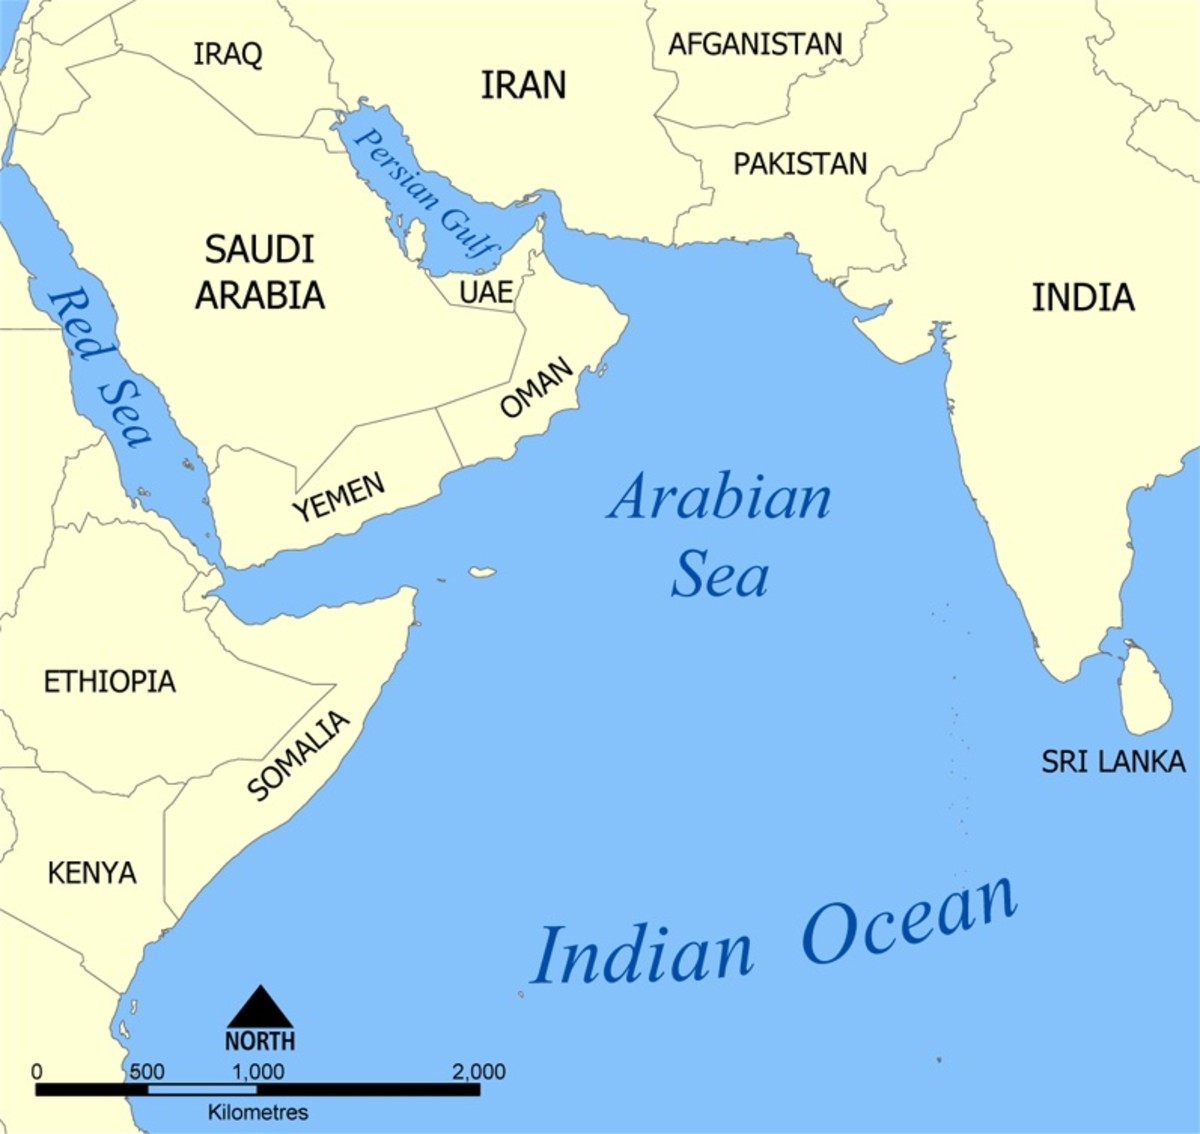 Socotra Island is the small yellow spot in the middle left of this map. It's located in the Arabian Sea off the coast of Somalia, but it belongs to Yemen.